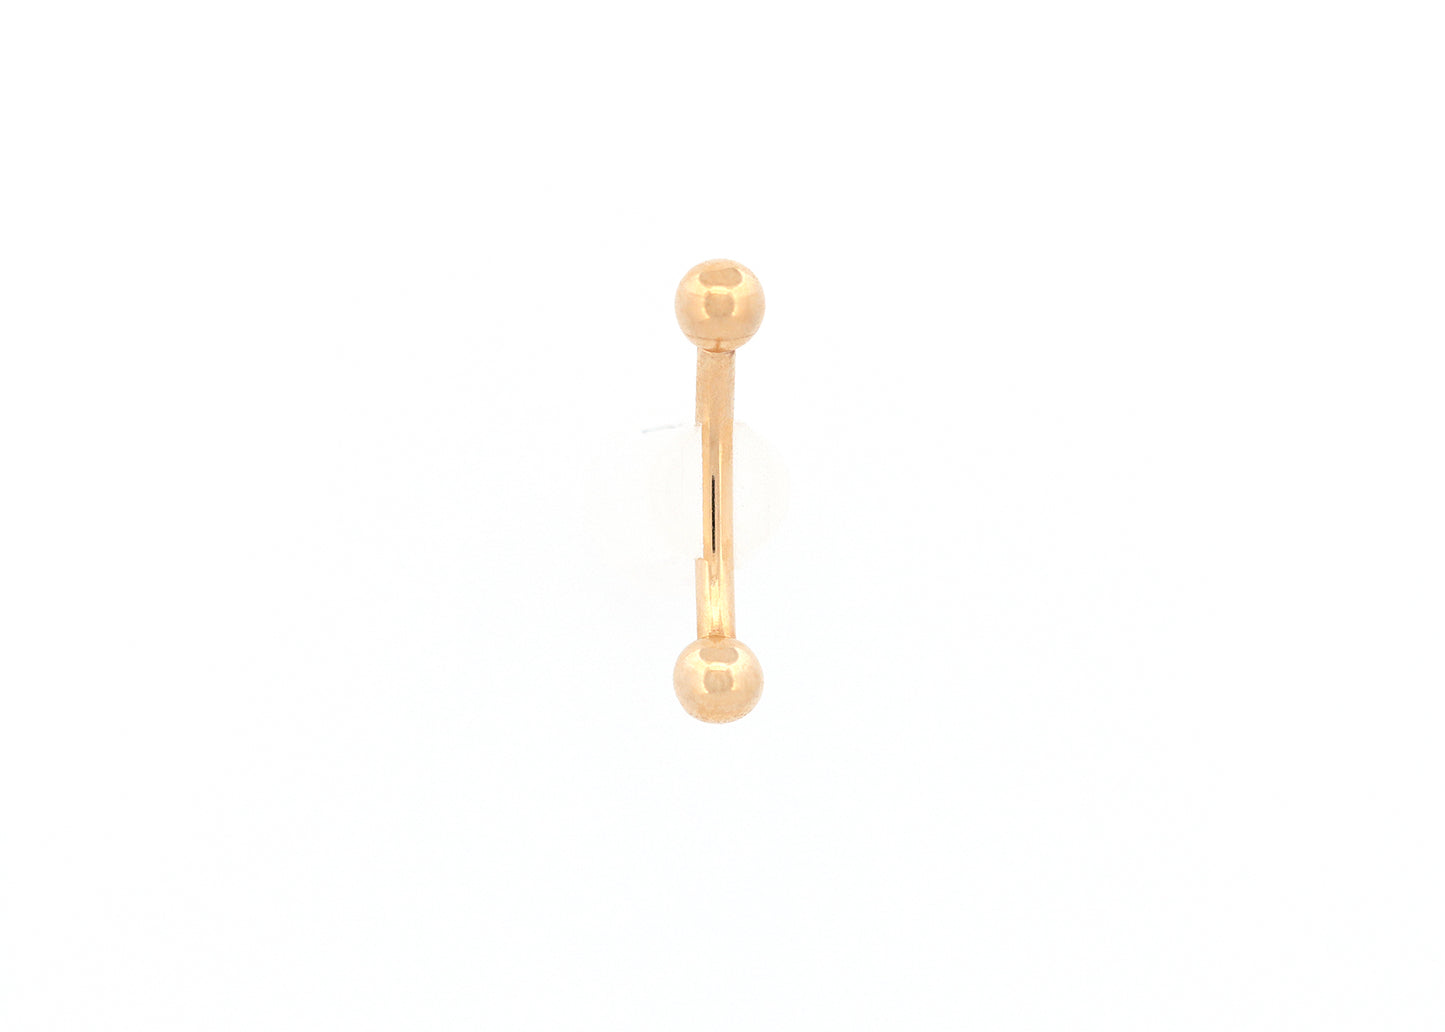 16g 14K Gold Curved Barbell